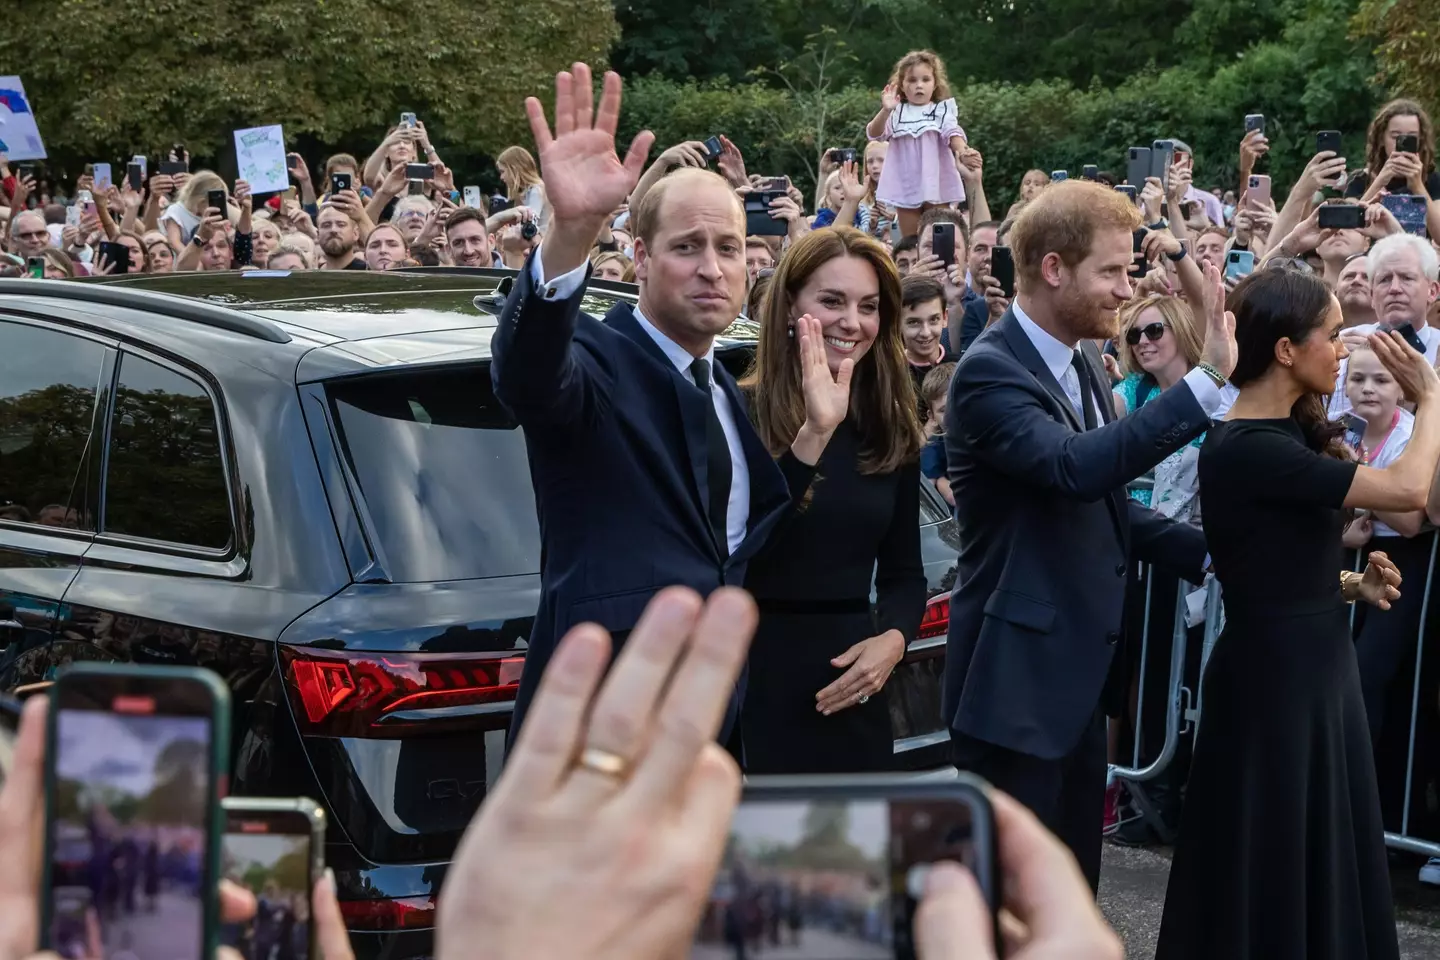 Prince William and Kate Middleton are now the Prince and Princess of Wales.